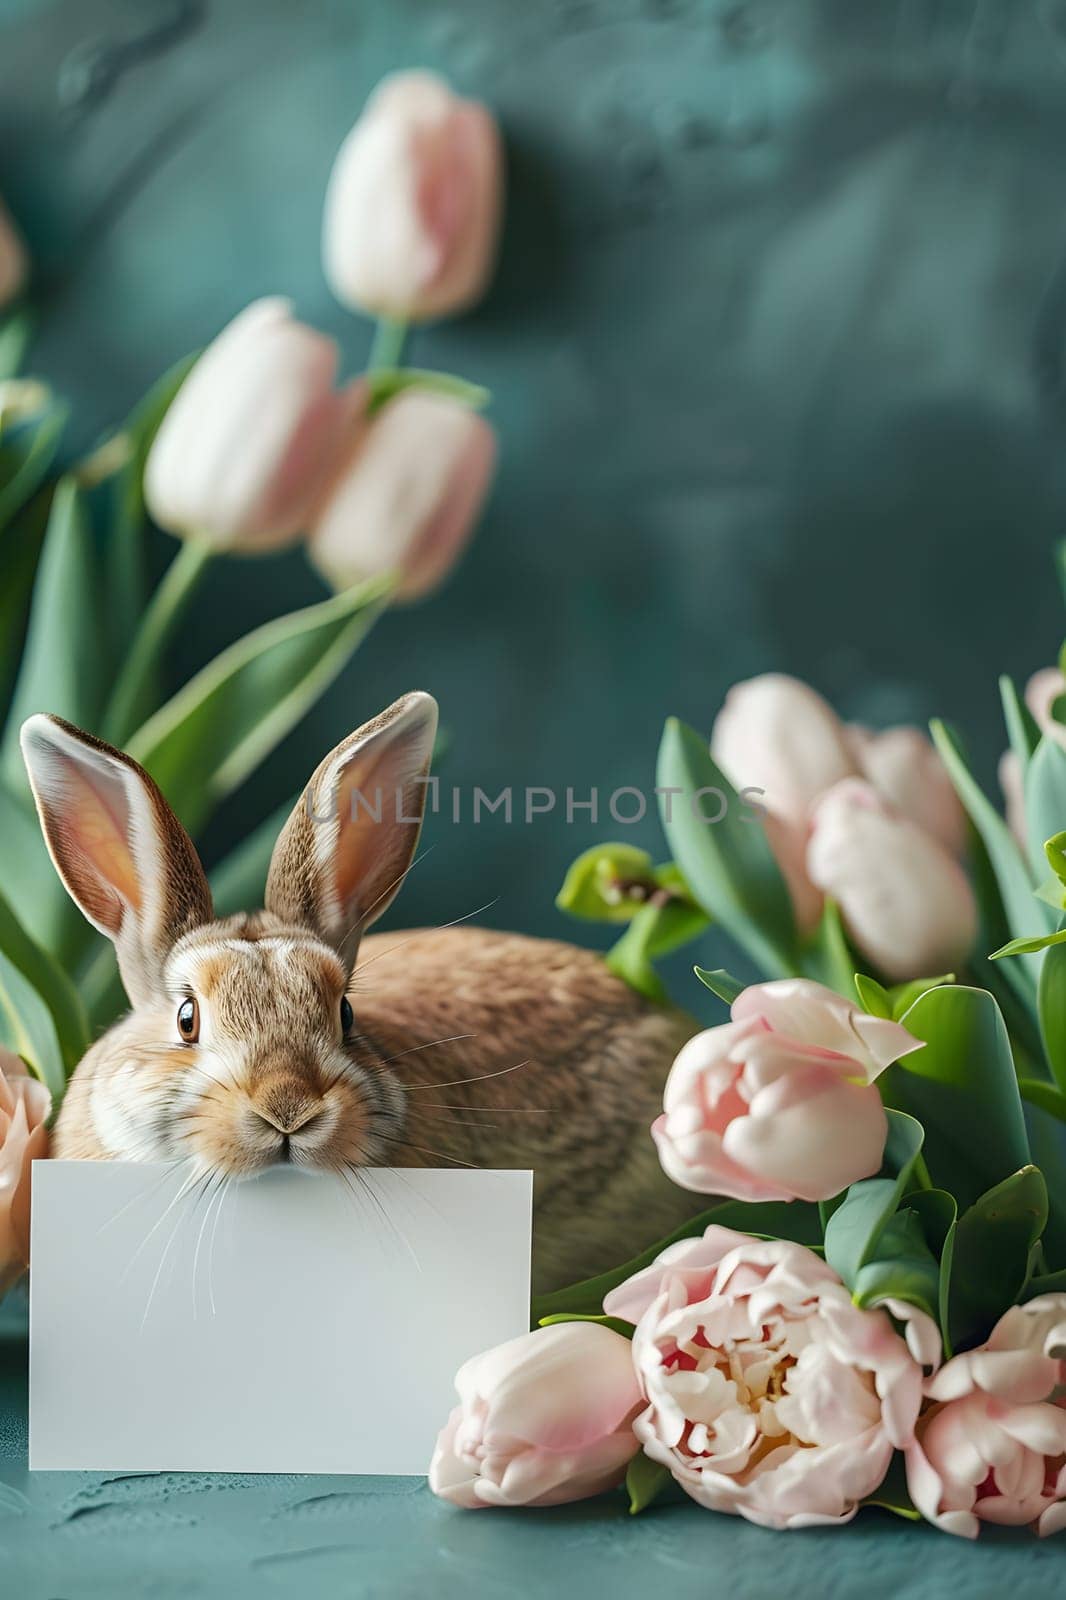 A rabbit is holding a white card in front of flowers by Nadtochiy